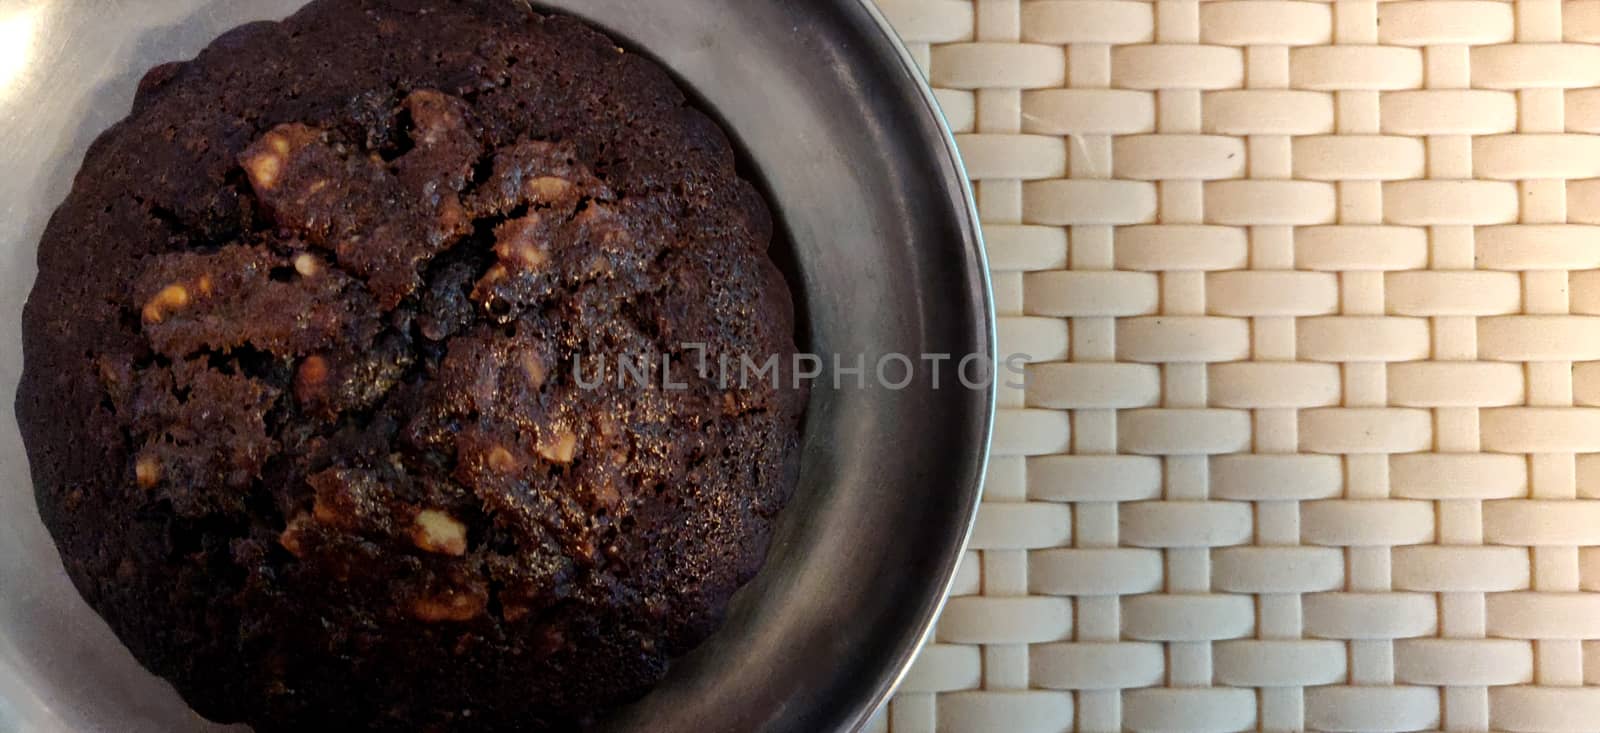 A close up of a big chocolate walnut muffin on a steel plate on a weave pattern table